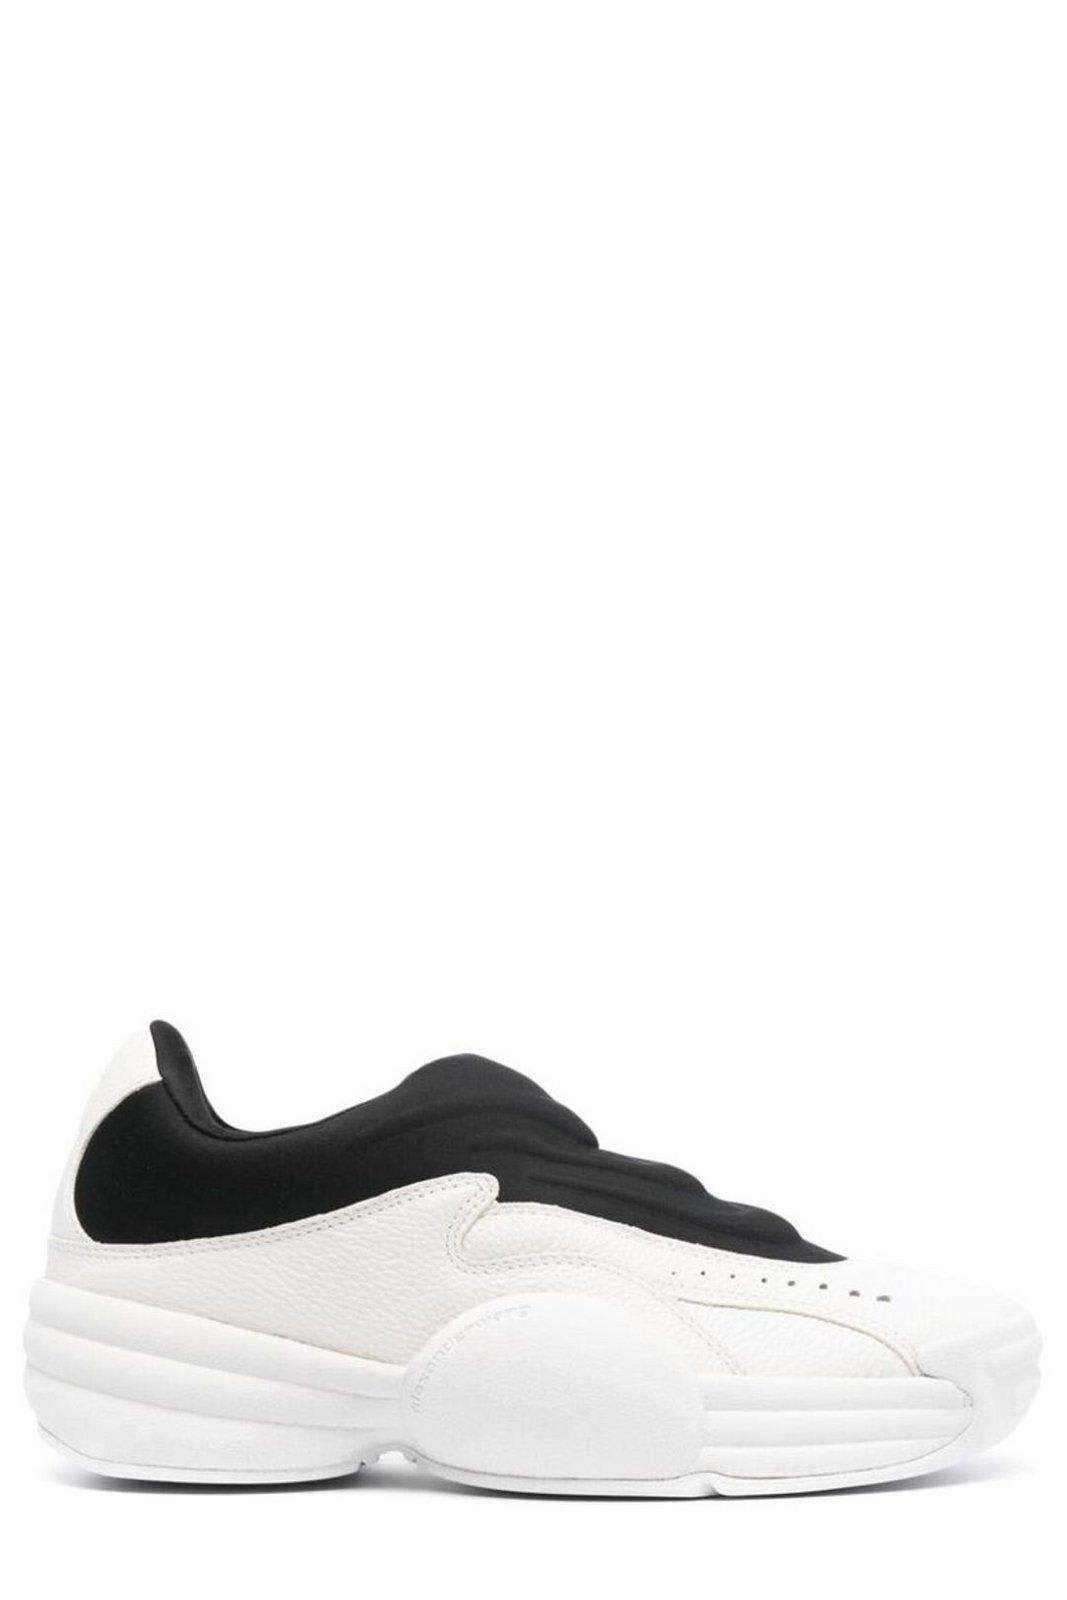 Shop Alexander Wang Lace-up Sneakers In Black/white